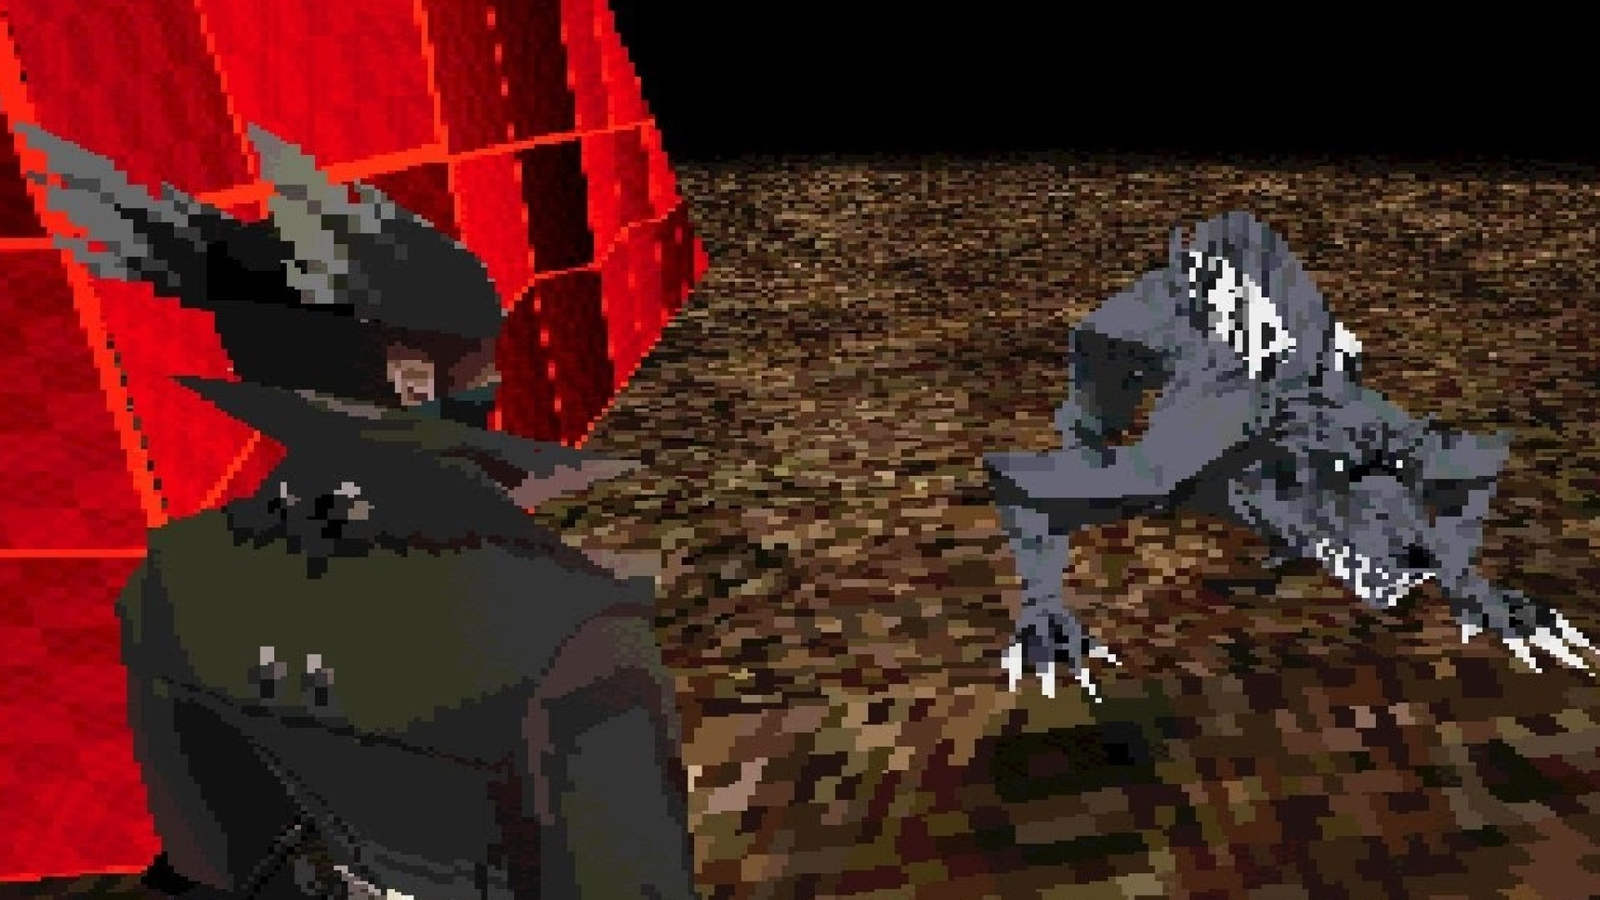 This PS1 Era Bloodborne Demake Is the Real Deal